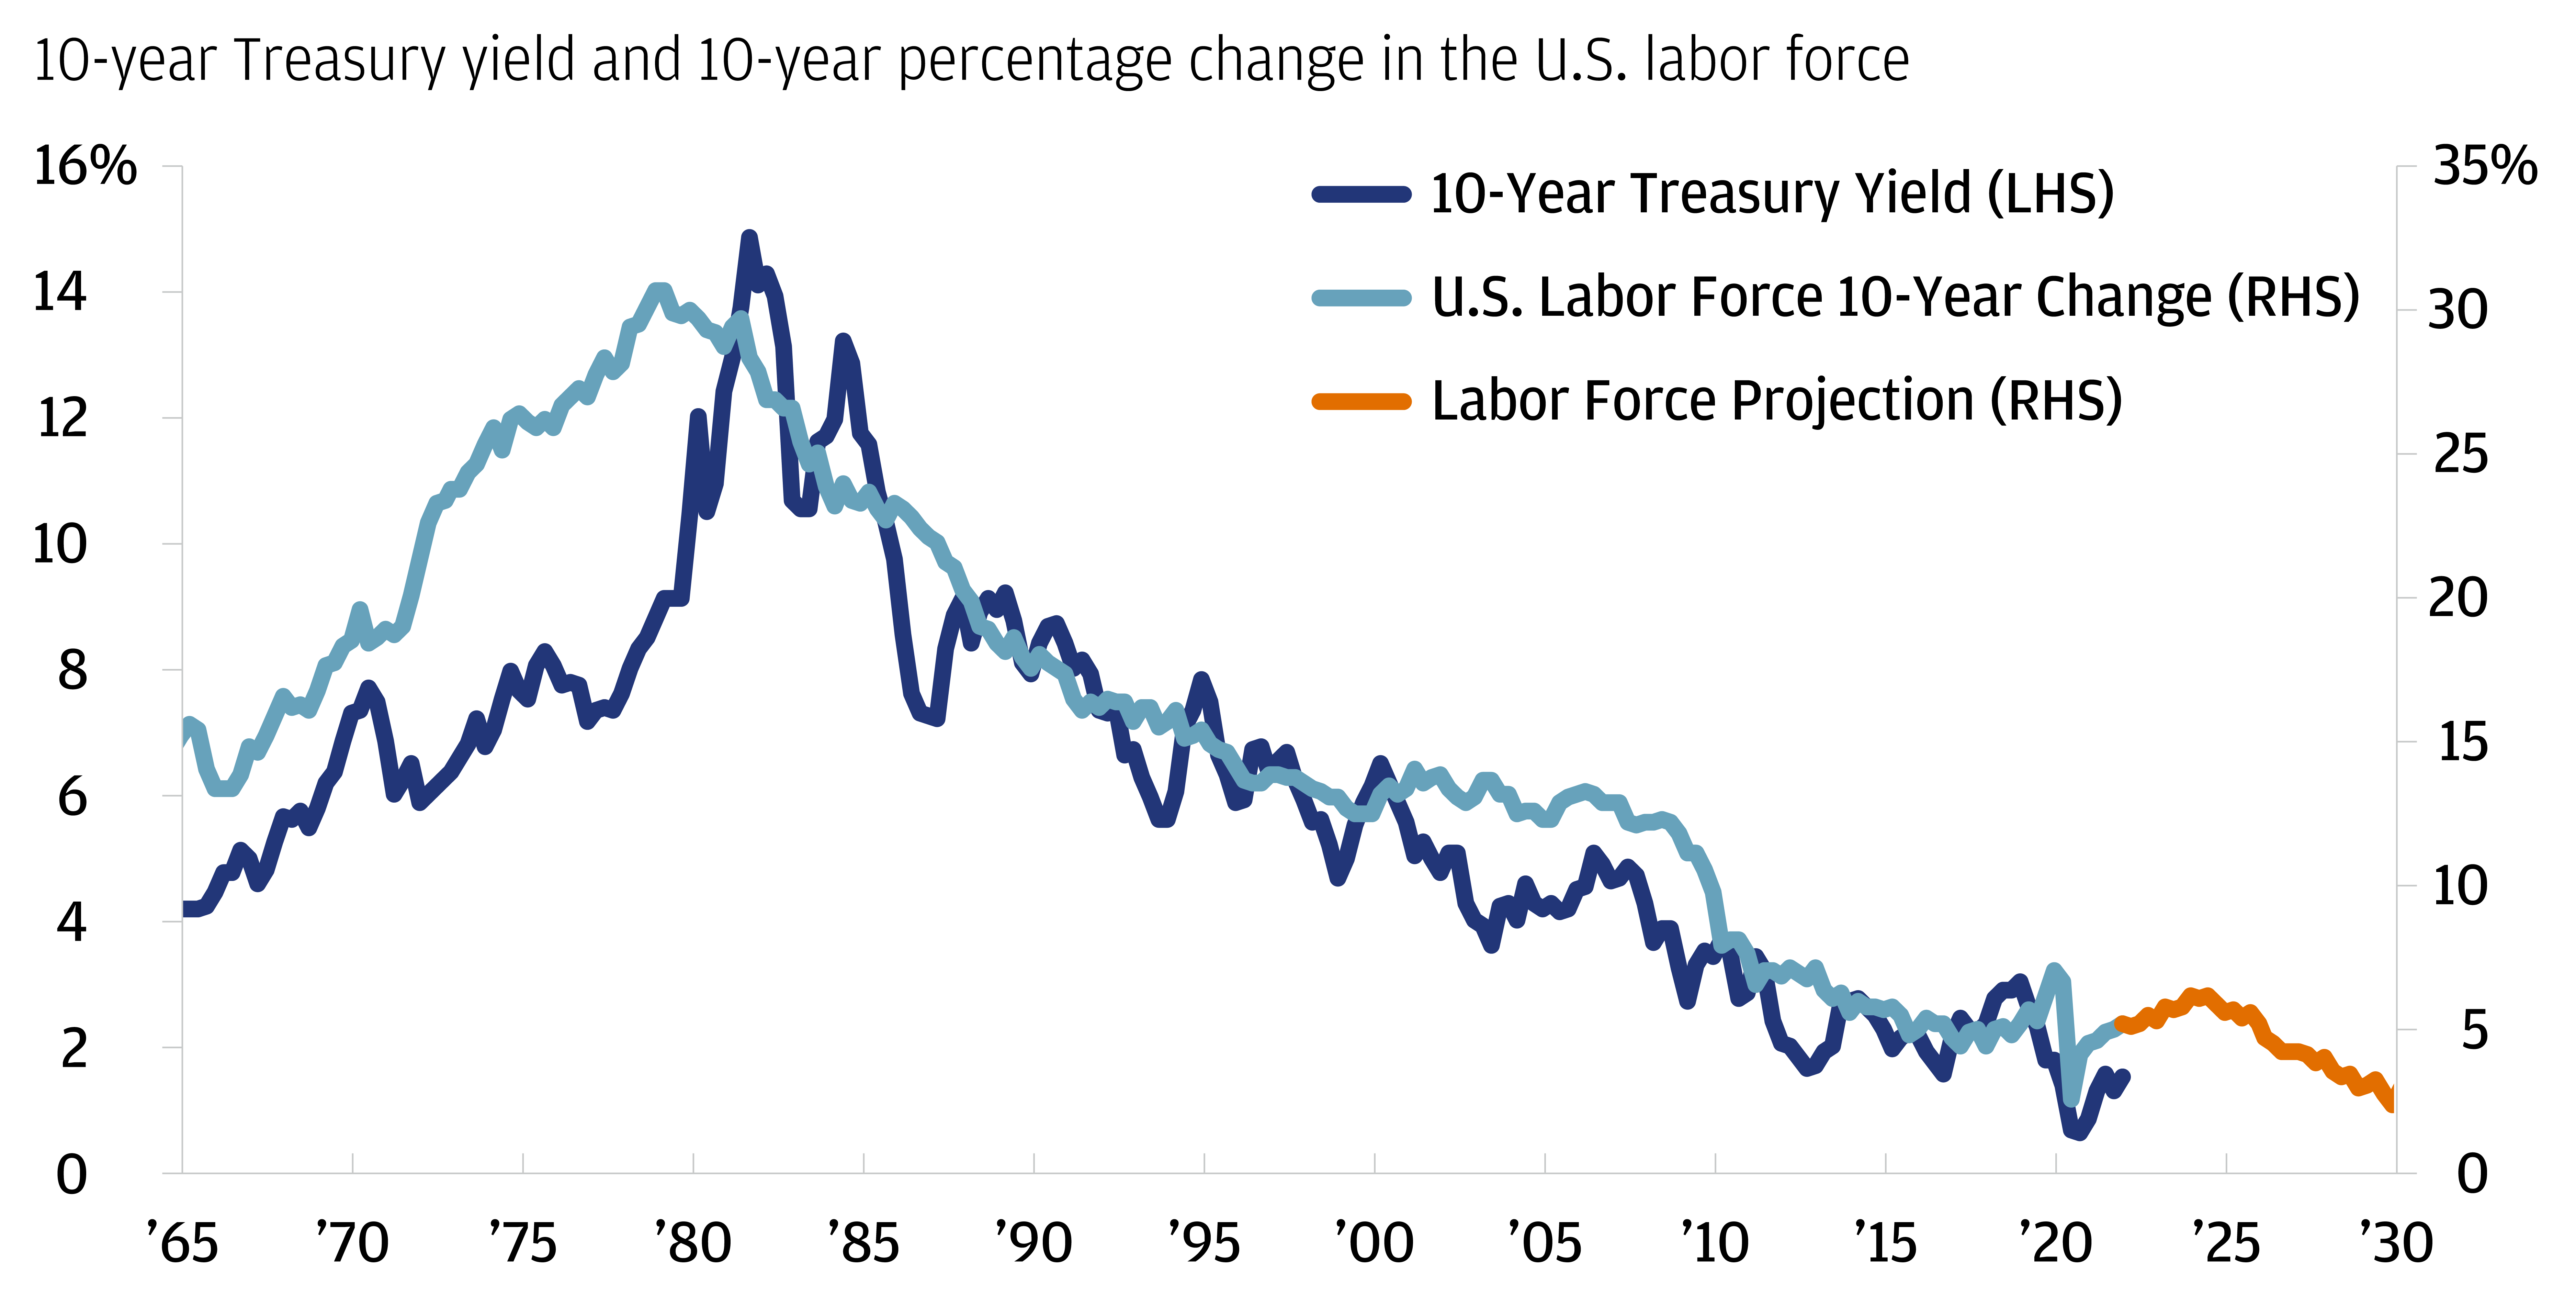 This chart shows the correlation between 10-year Treasury yields and the 10-year percentage change in the U.S. labor force since 1965.